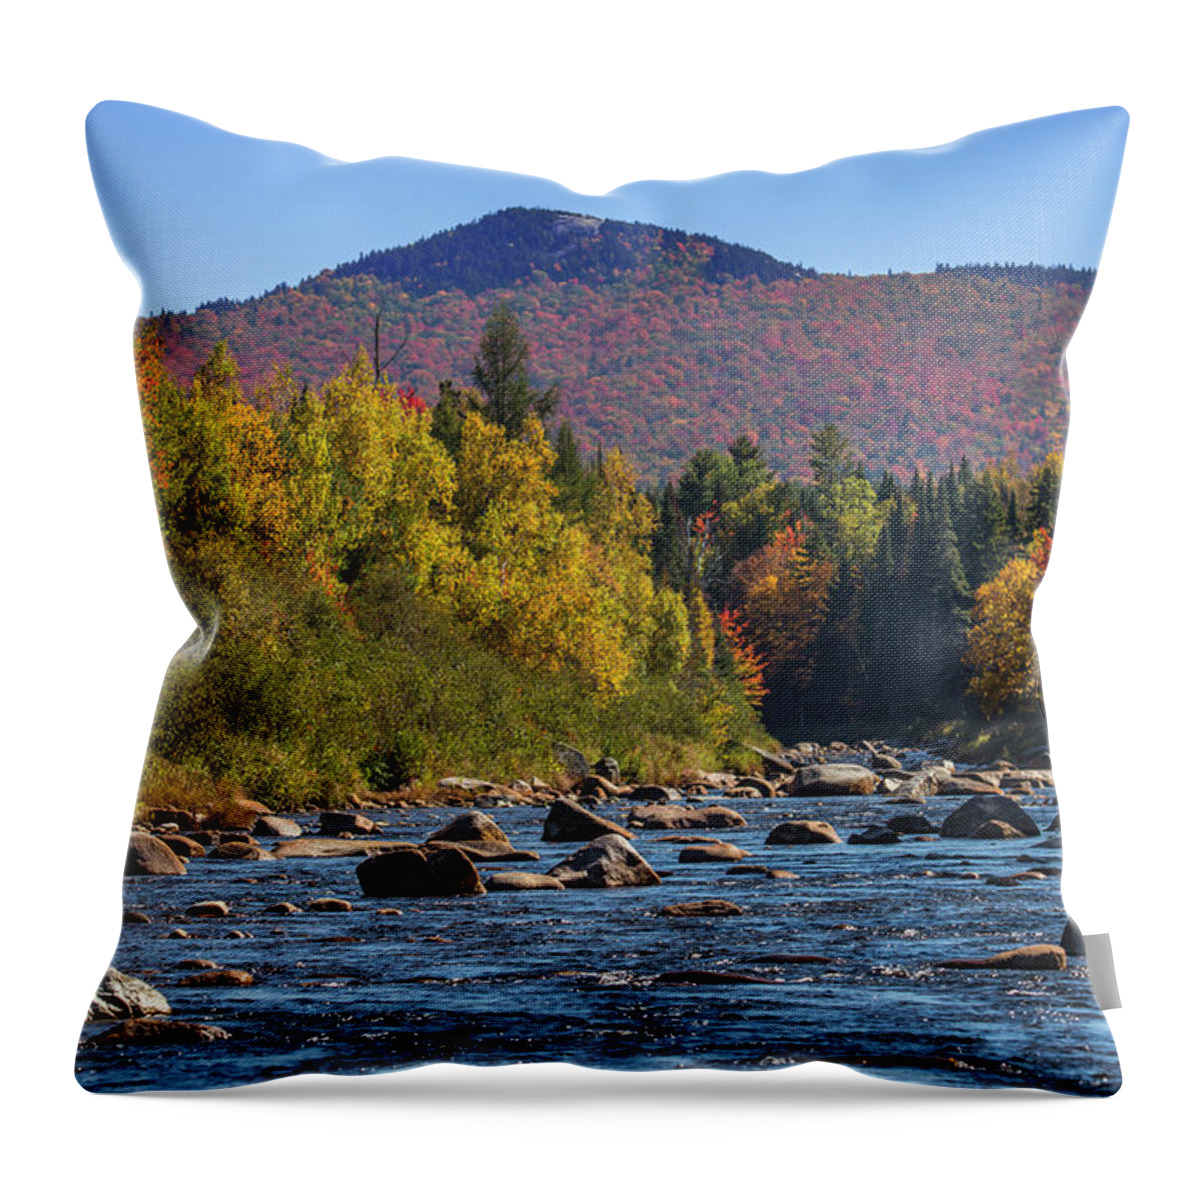 Sugarloaf Throw Pillow featuring the photograph Sugarloaf River Autumn by White Mountain Images